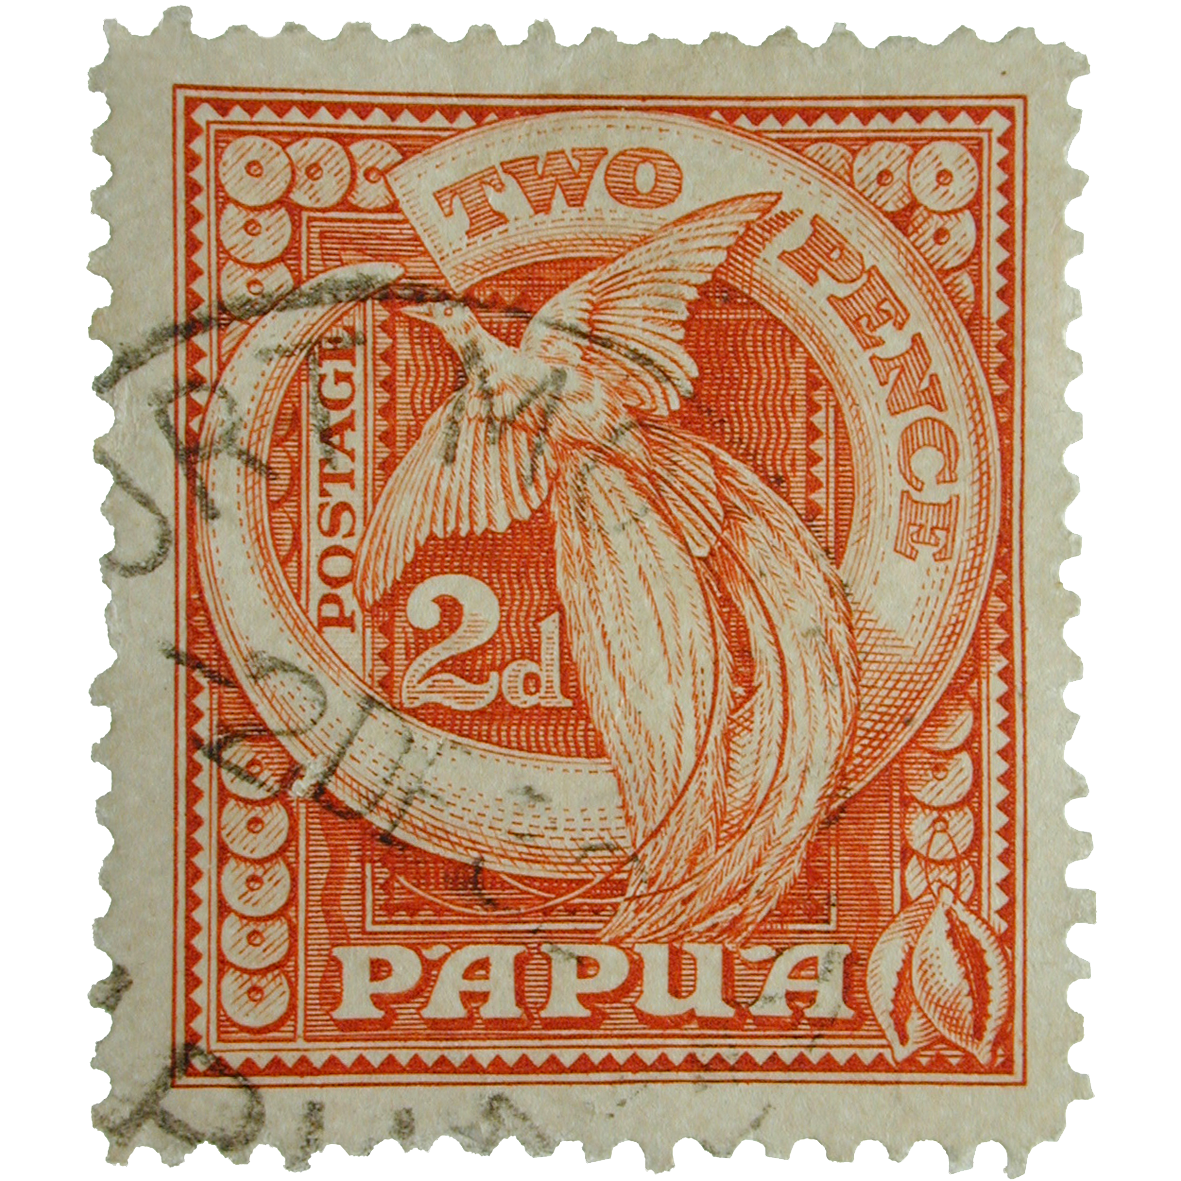 Indonesia, Papua, Post Stamp 2 Pence, 1952  T (obverse)